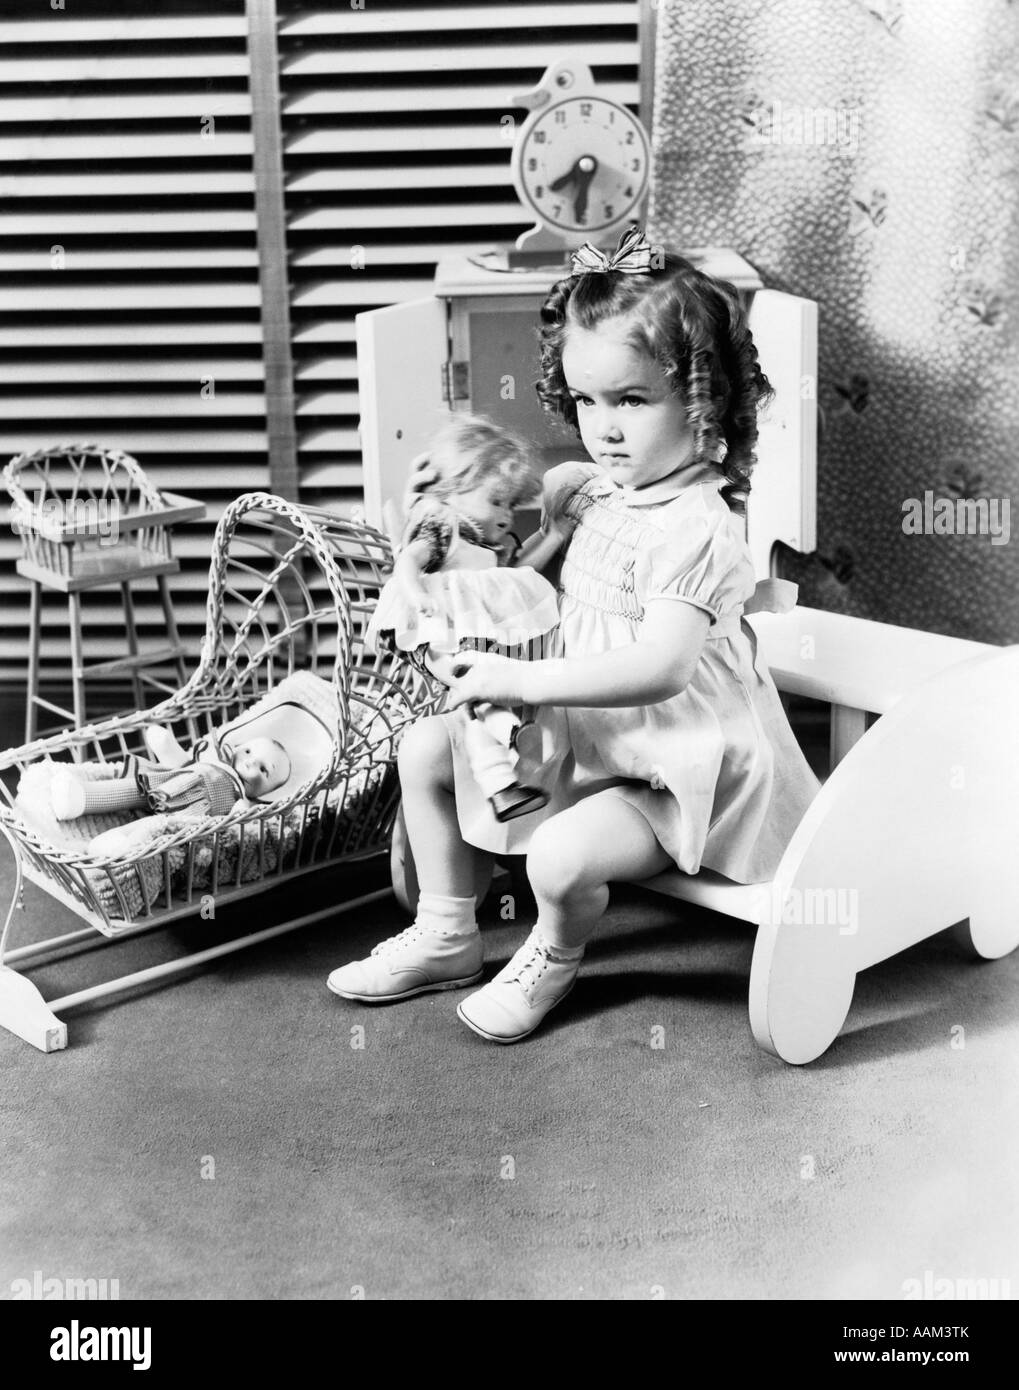 1940s 3 YEAR OLD GIRL SITTING HOLDING BABY DOLL TOY CRADLE TOY HIGH CHAIR & TOY CLOCK VENETIAN BLINDS Stock Photo